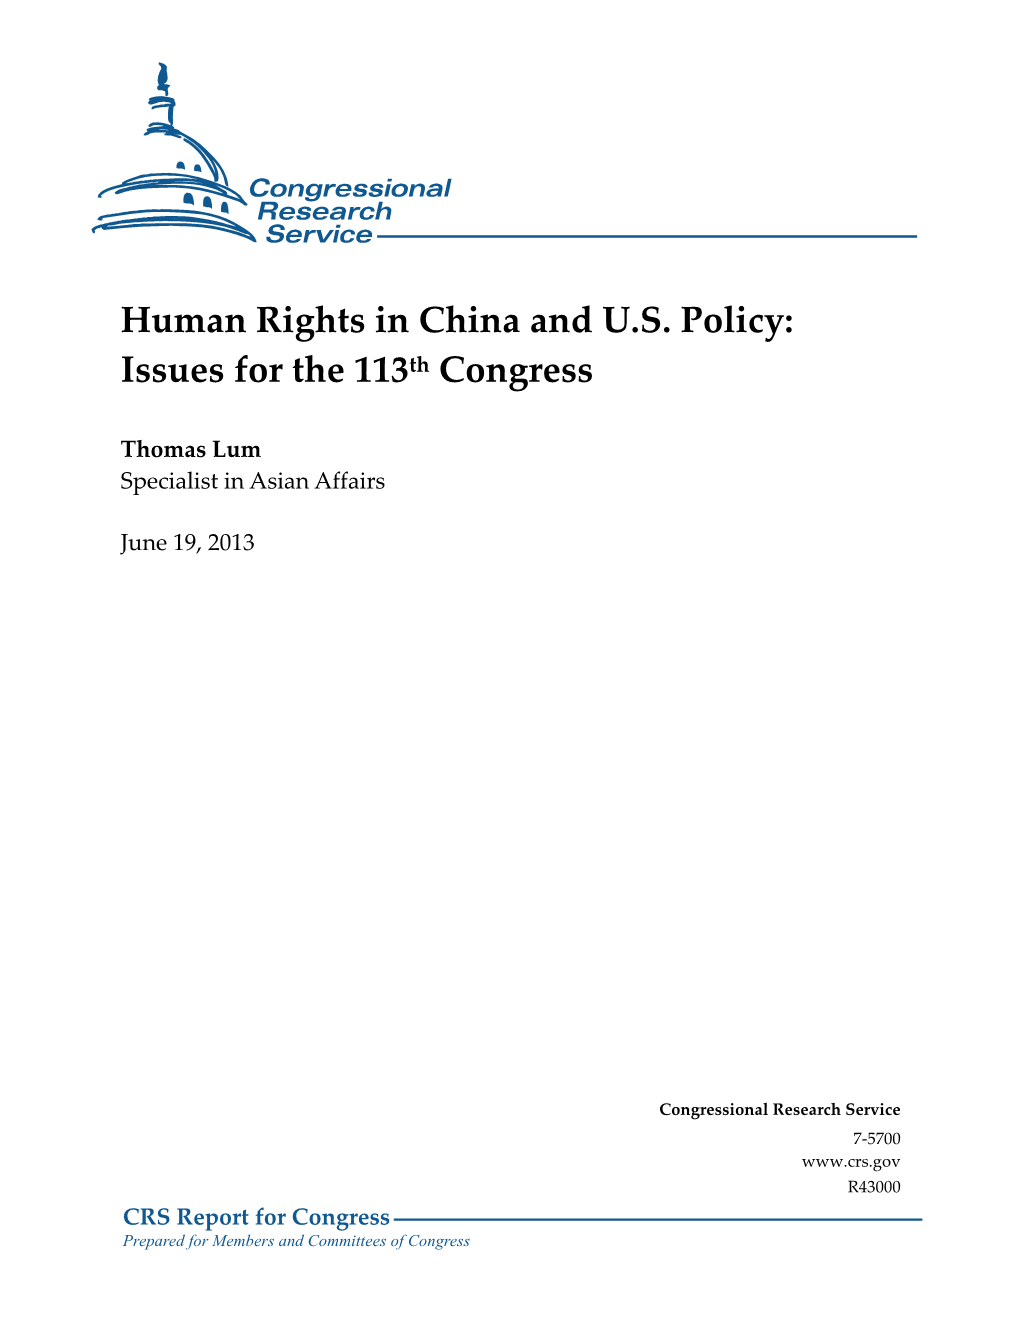 Human Rights in China and US Policy